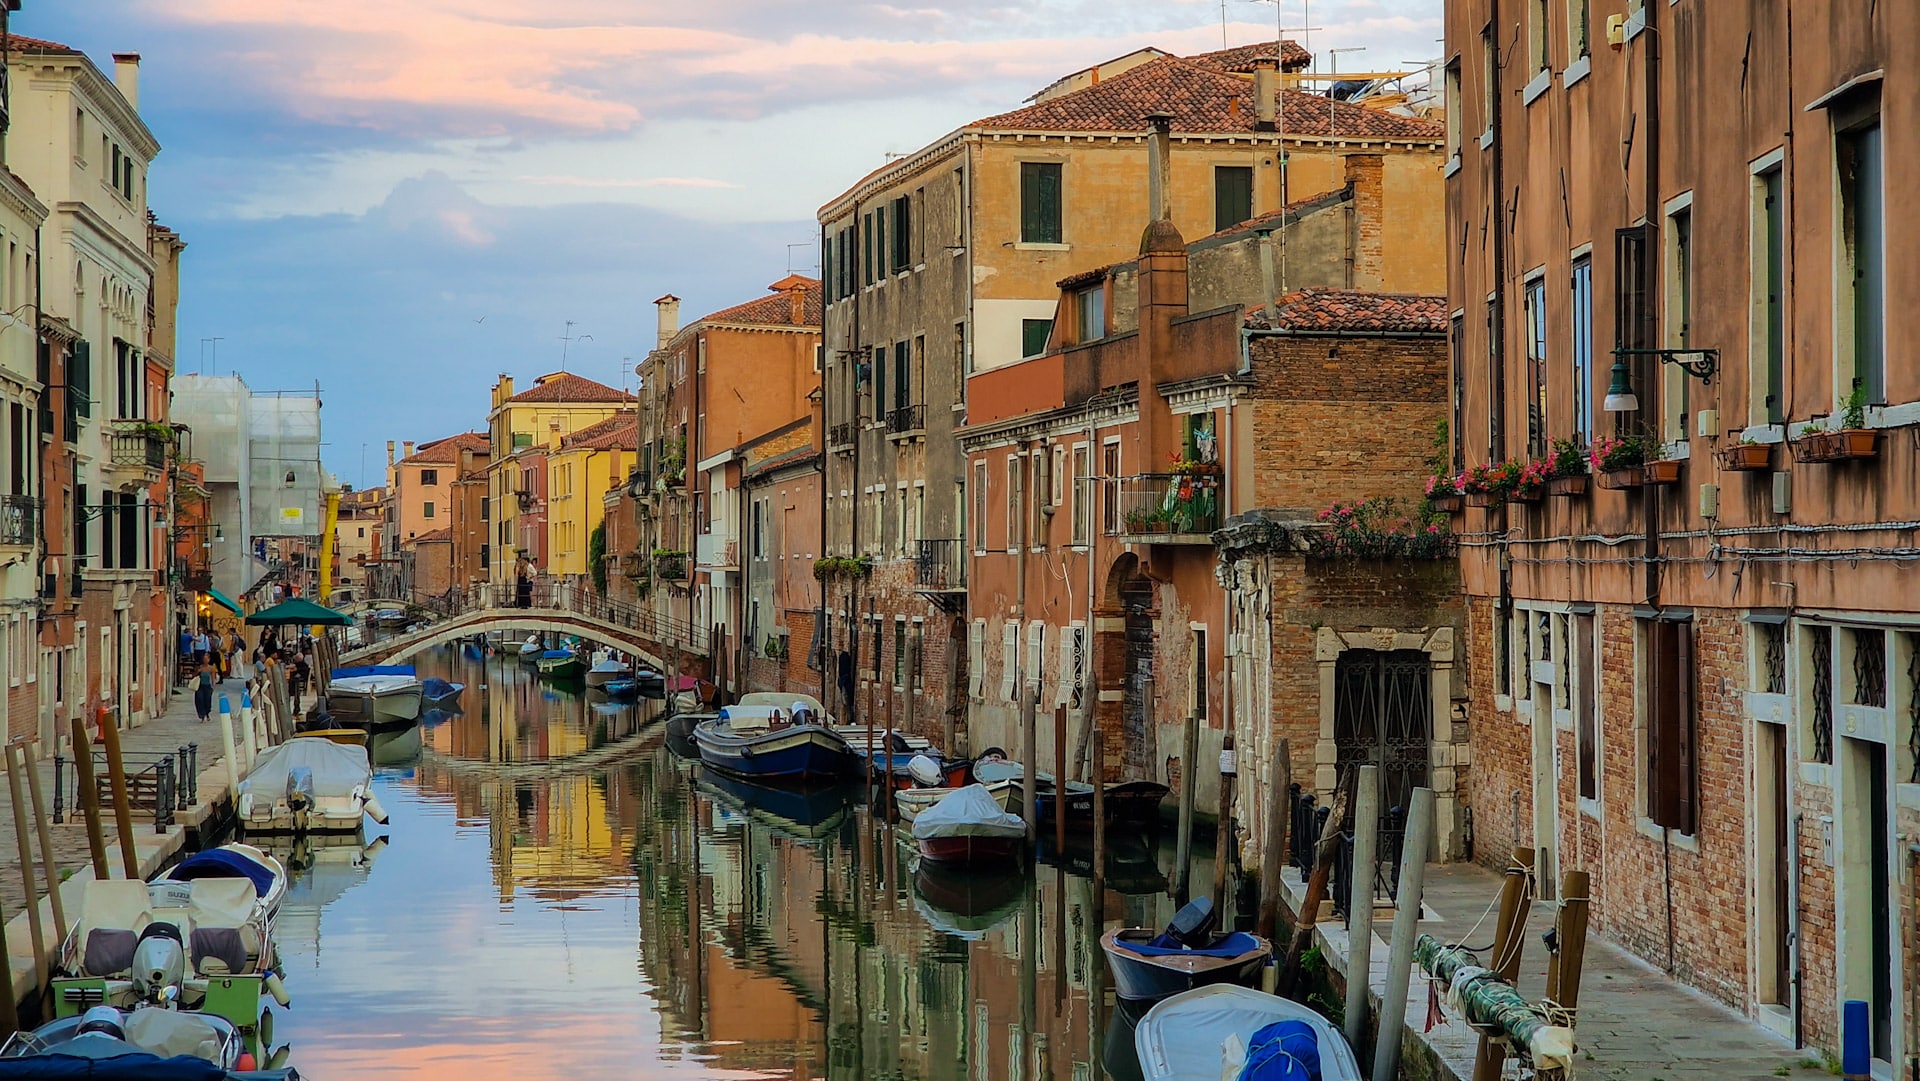 Cannaregio is a charming sestiere and one of the best quarters to stay in Venice